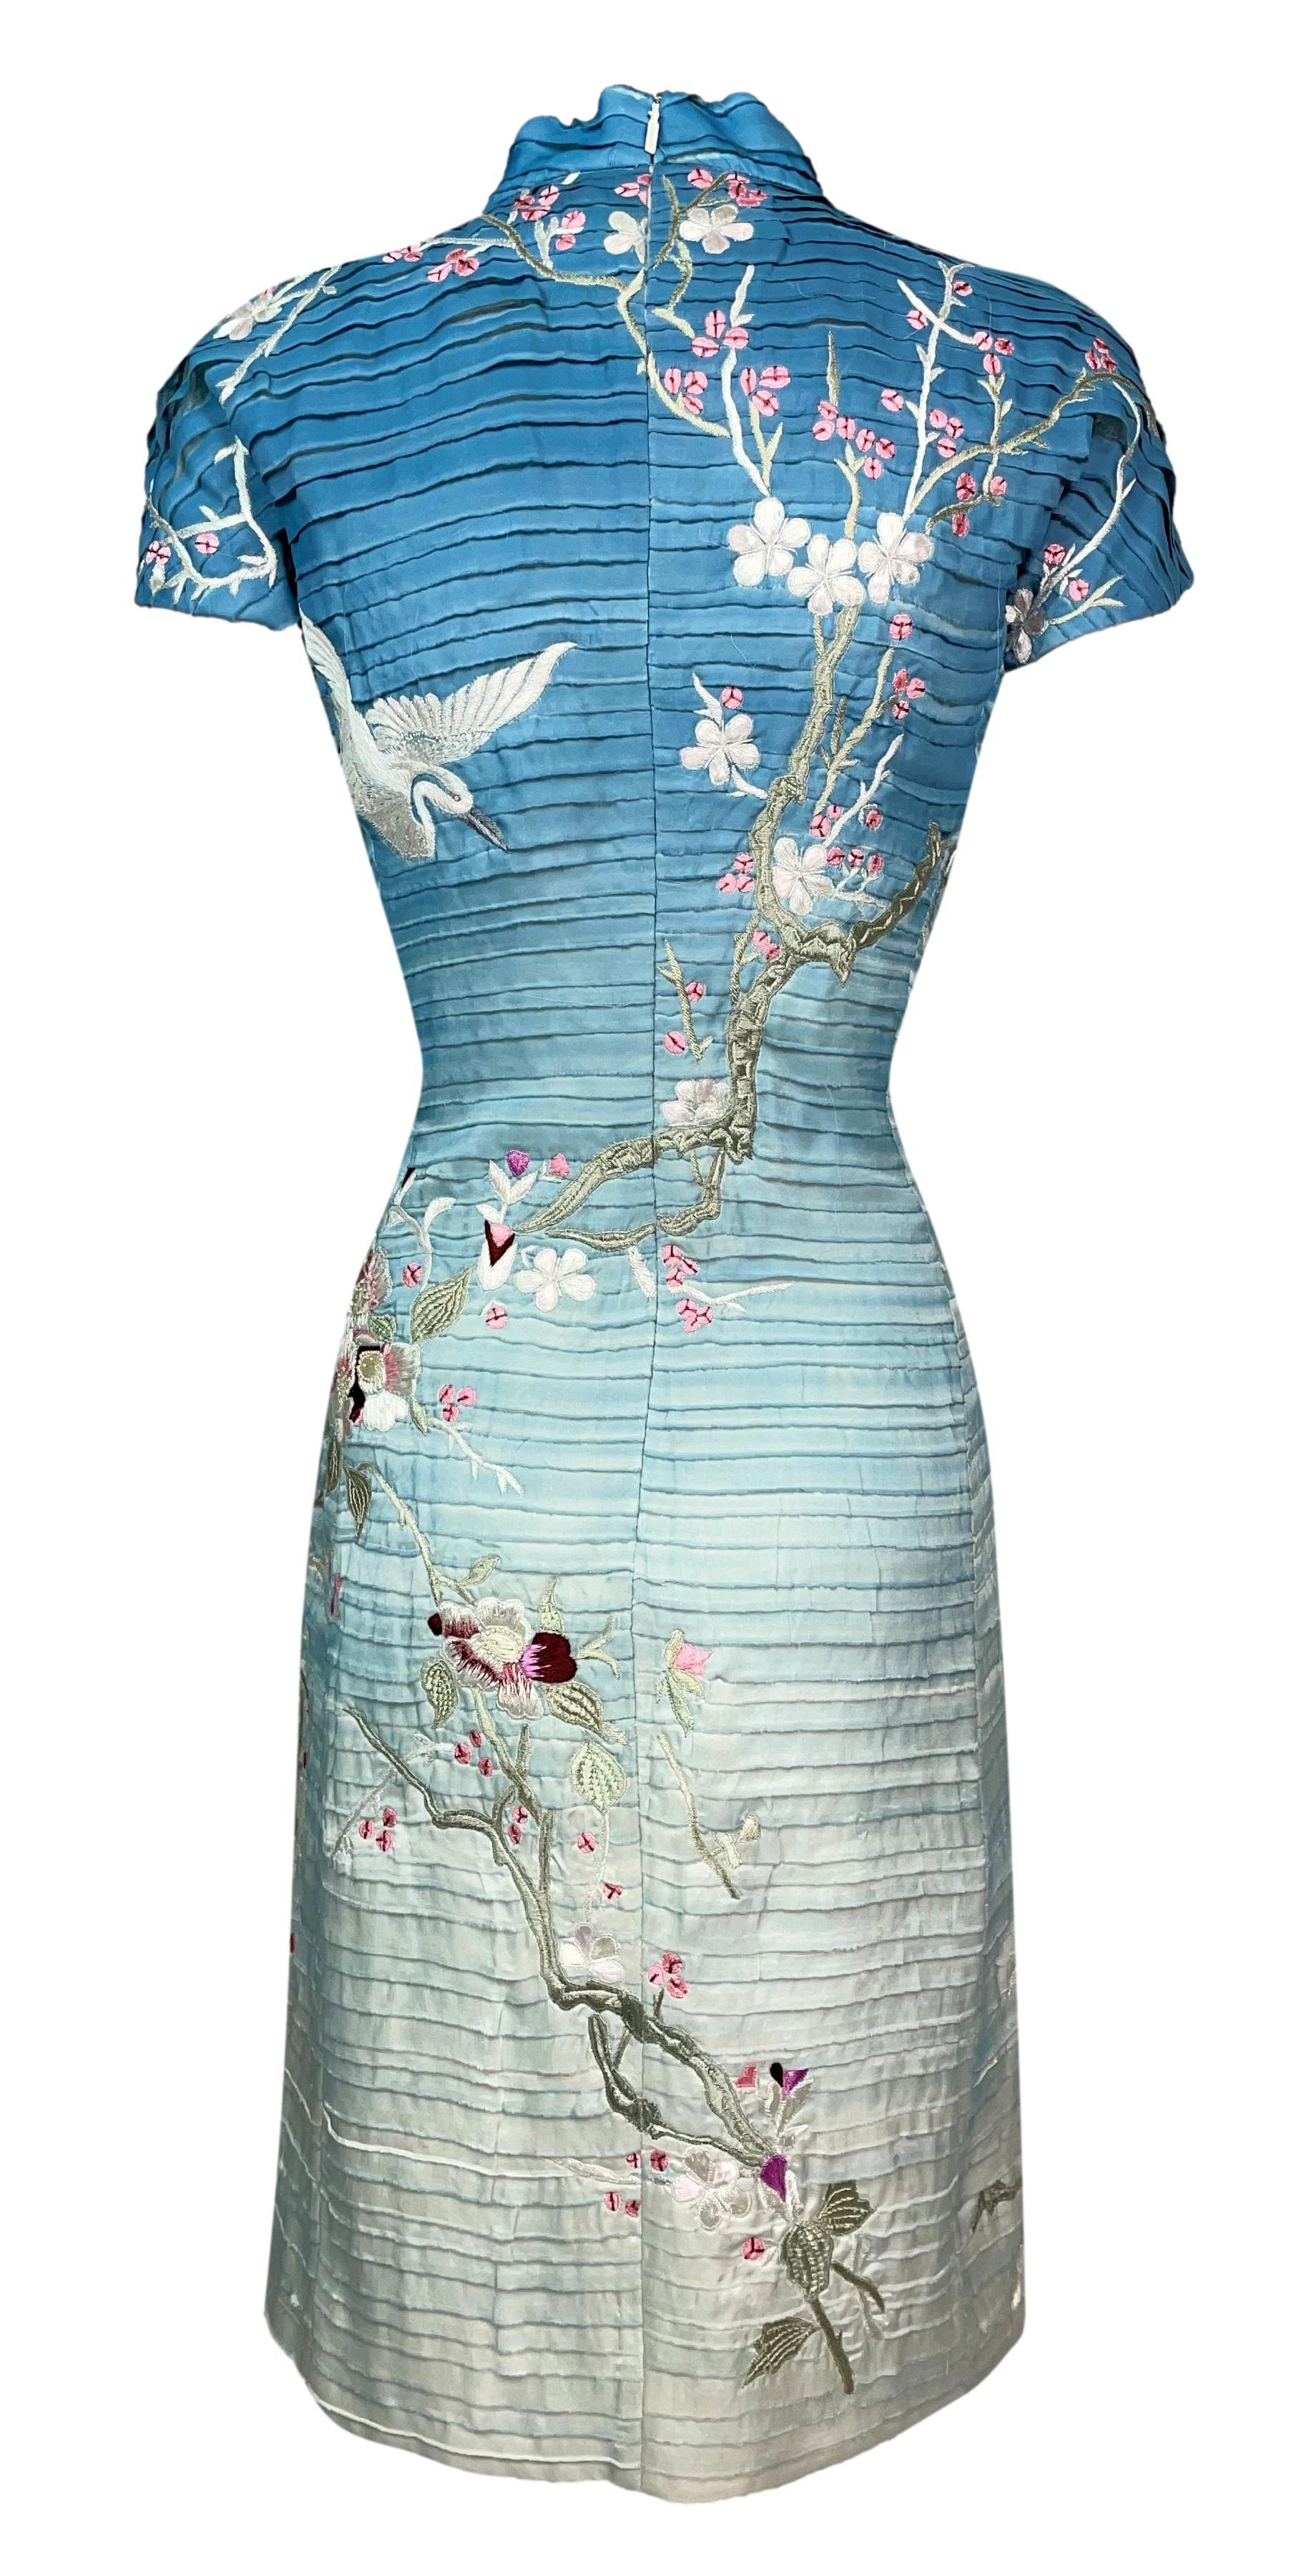 S/S 2003 Gucci by Tom Ford Runway Blue Japanese Cherry Blossom Mini Dress In Good Condition In Yukon, OK